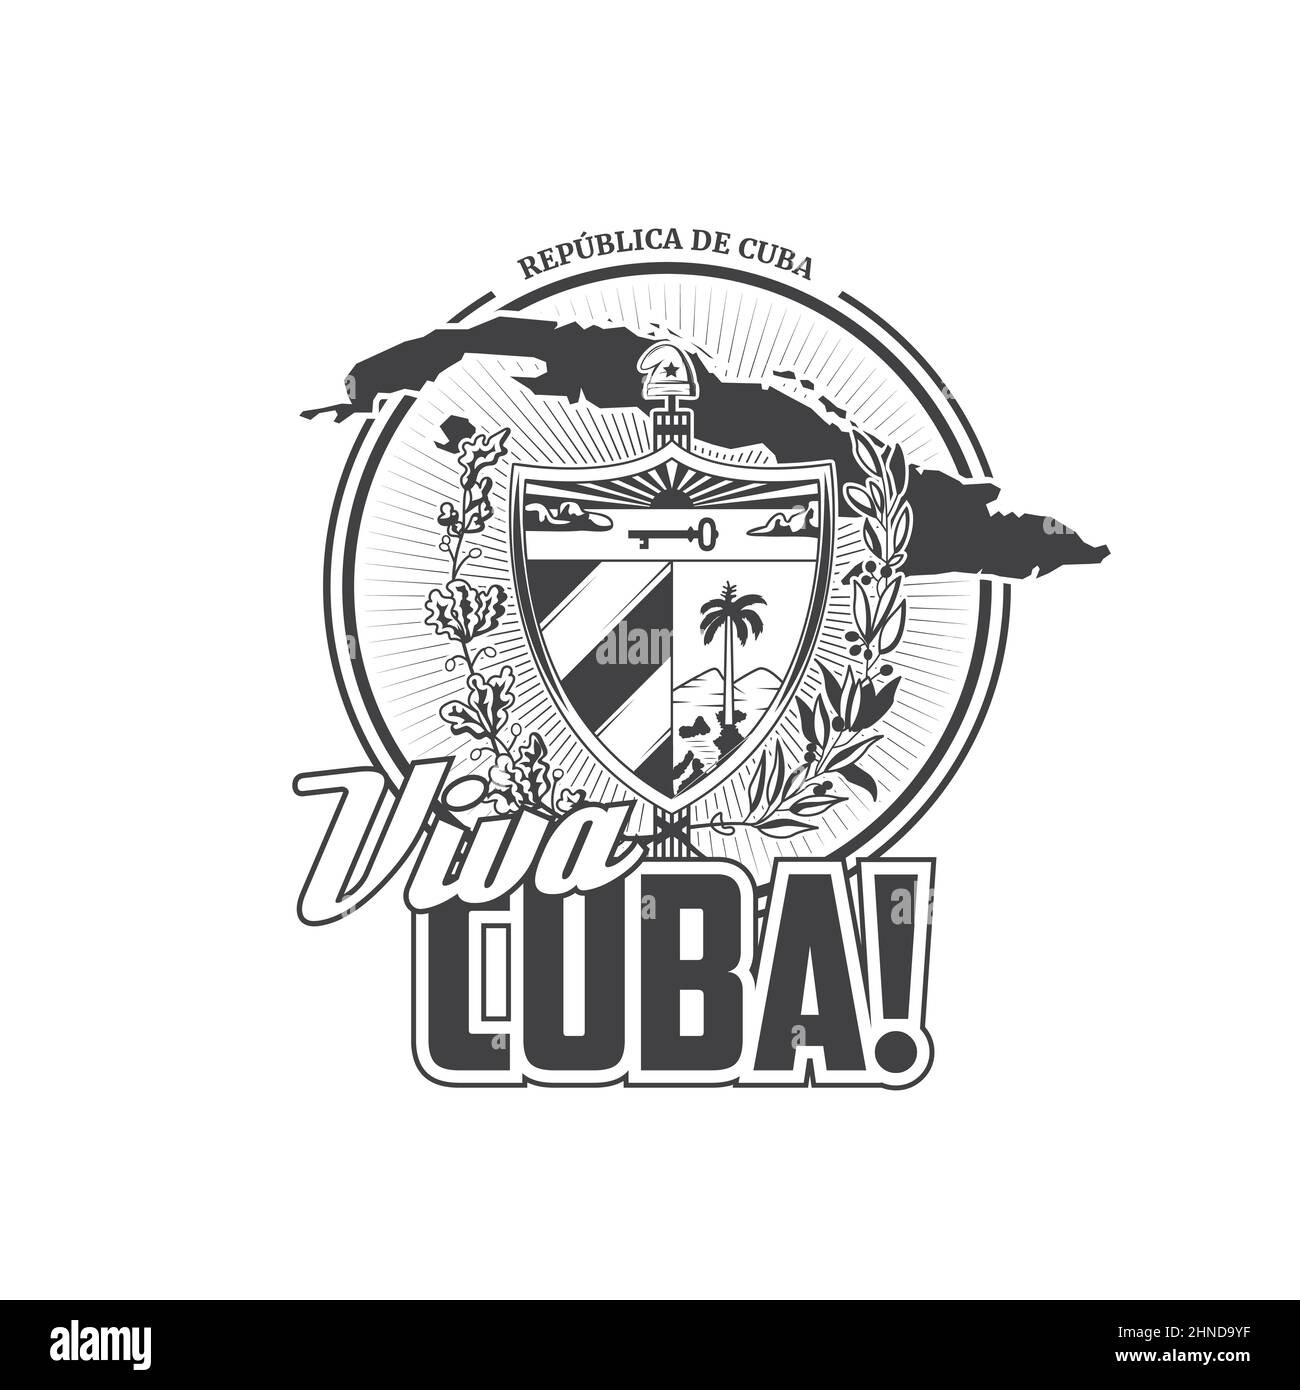 Viva Cuba icon with vector map and coat of arms of Republic of Cuba. Cuban travel and tourism isolated heraldic shield with phrygian cap, flag, oak an Stock Vector